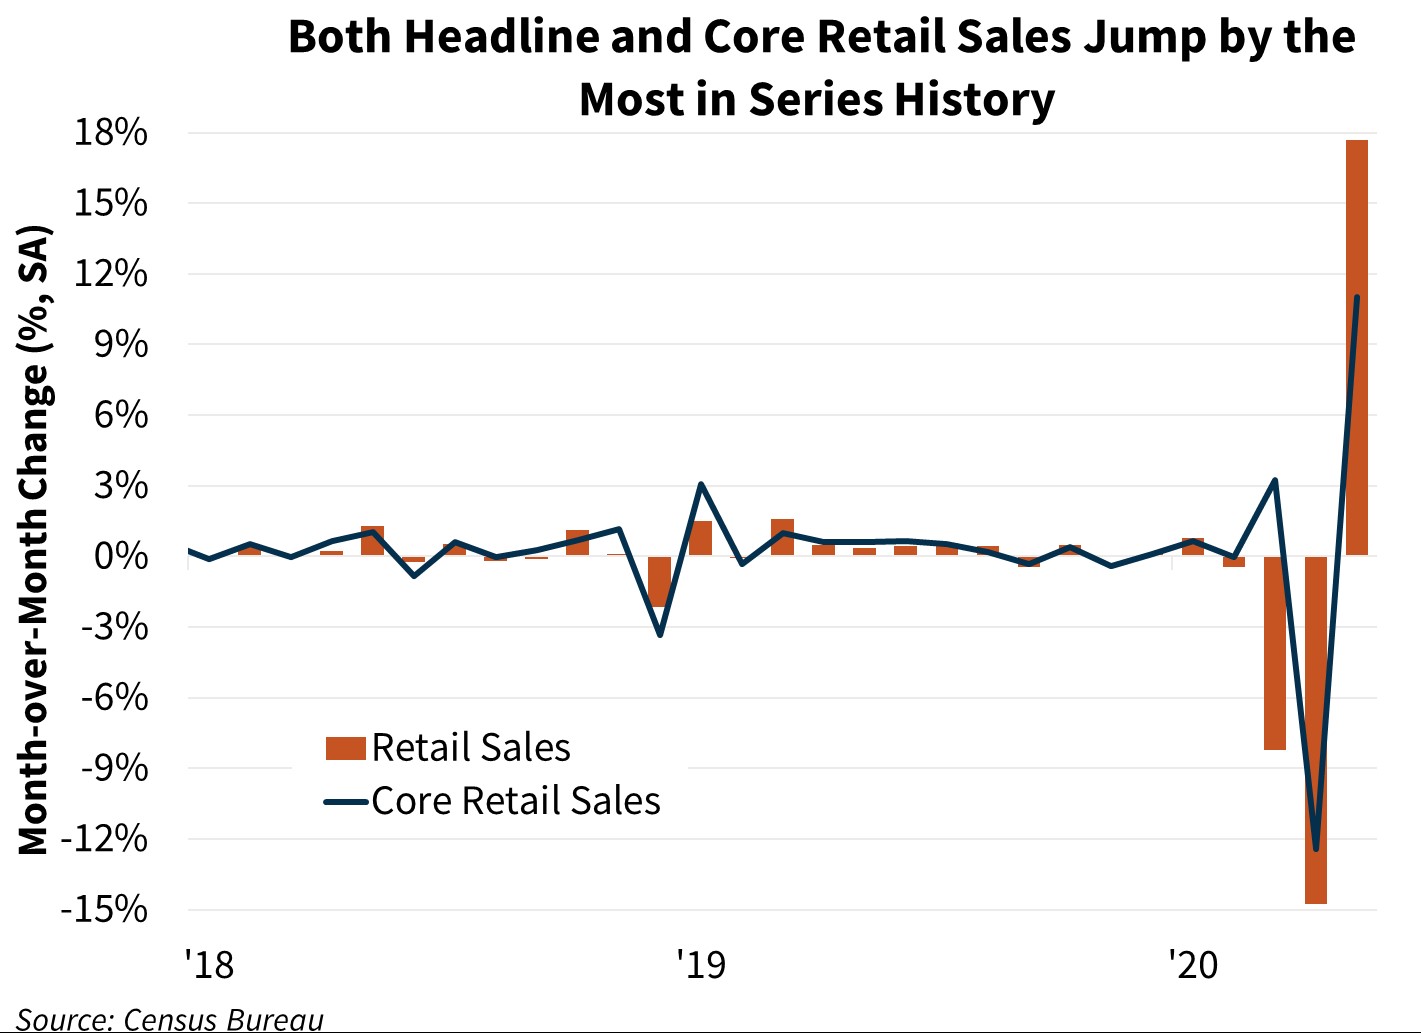 Both Headline and Core Retail Sales Jump by the Most in Series History